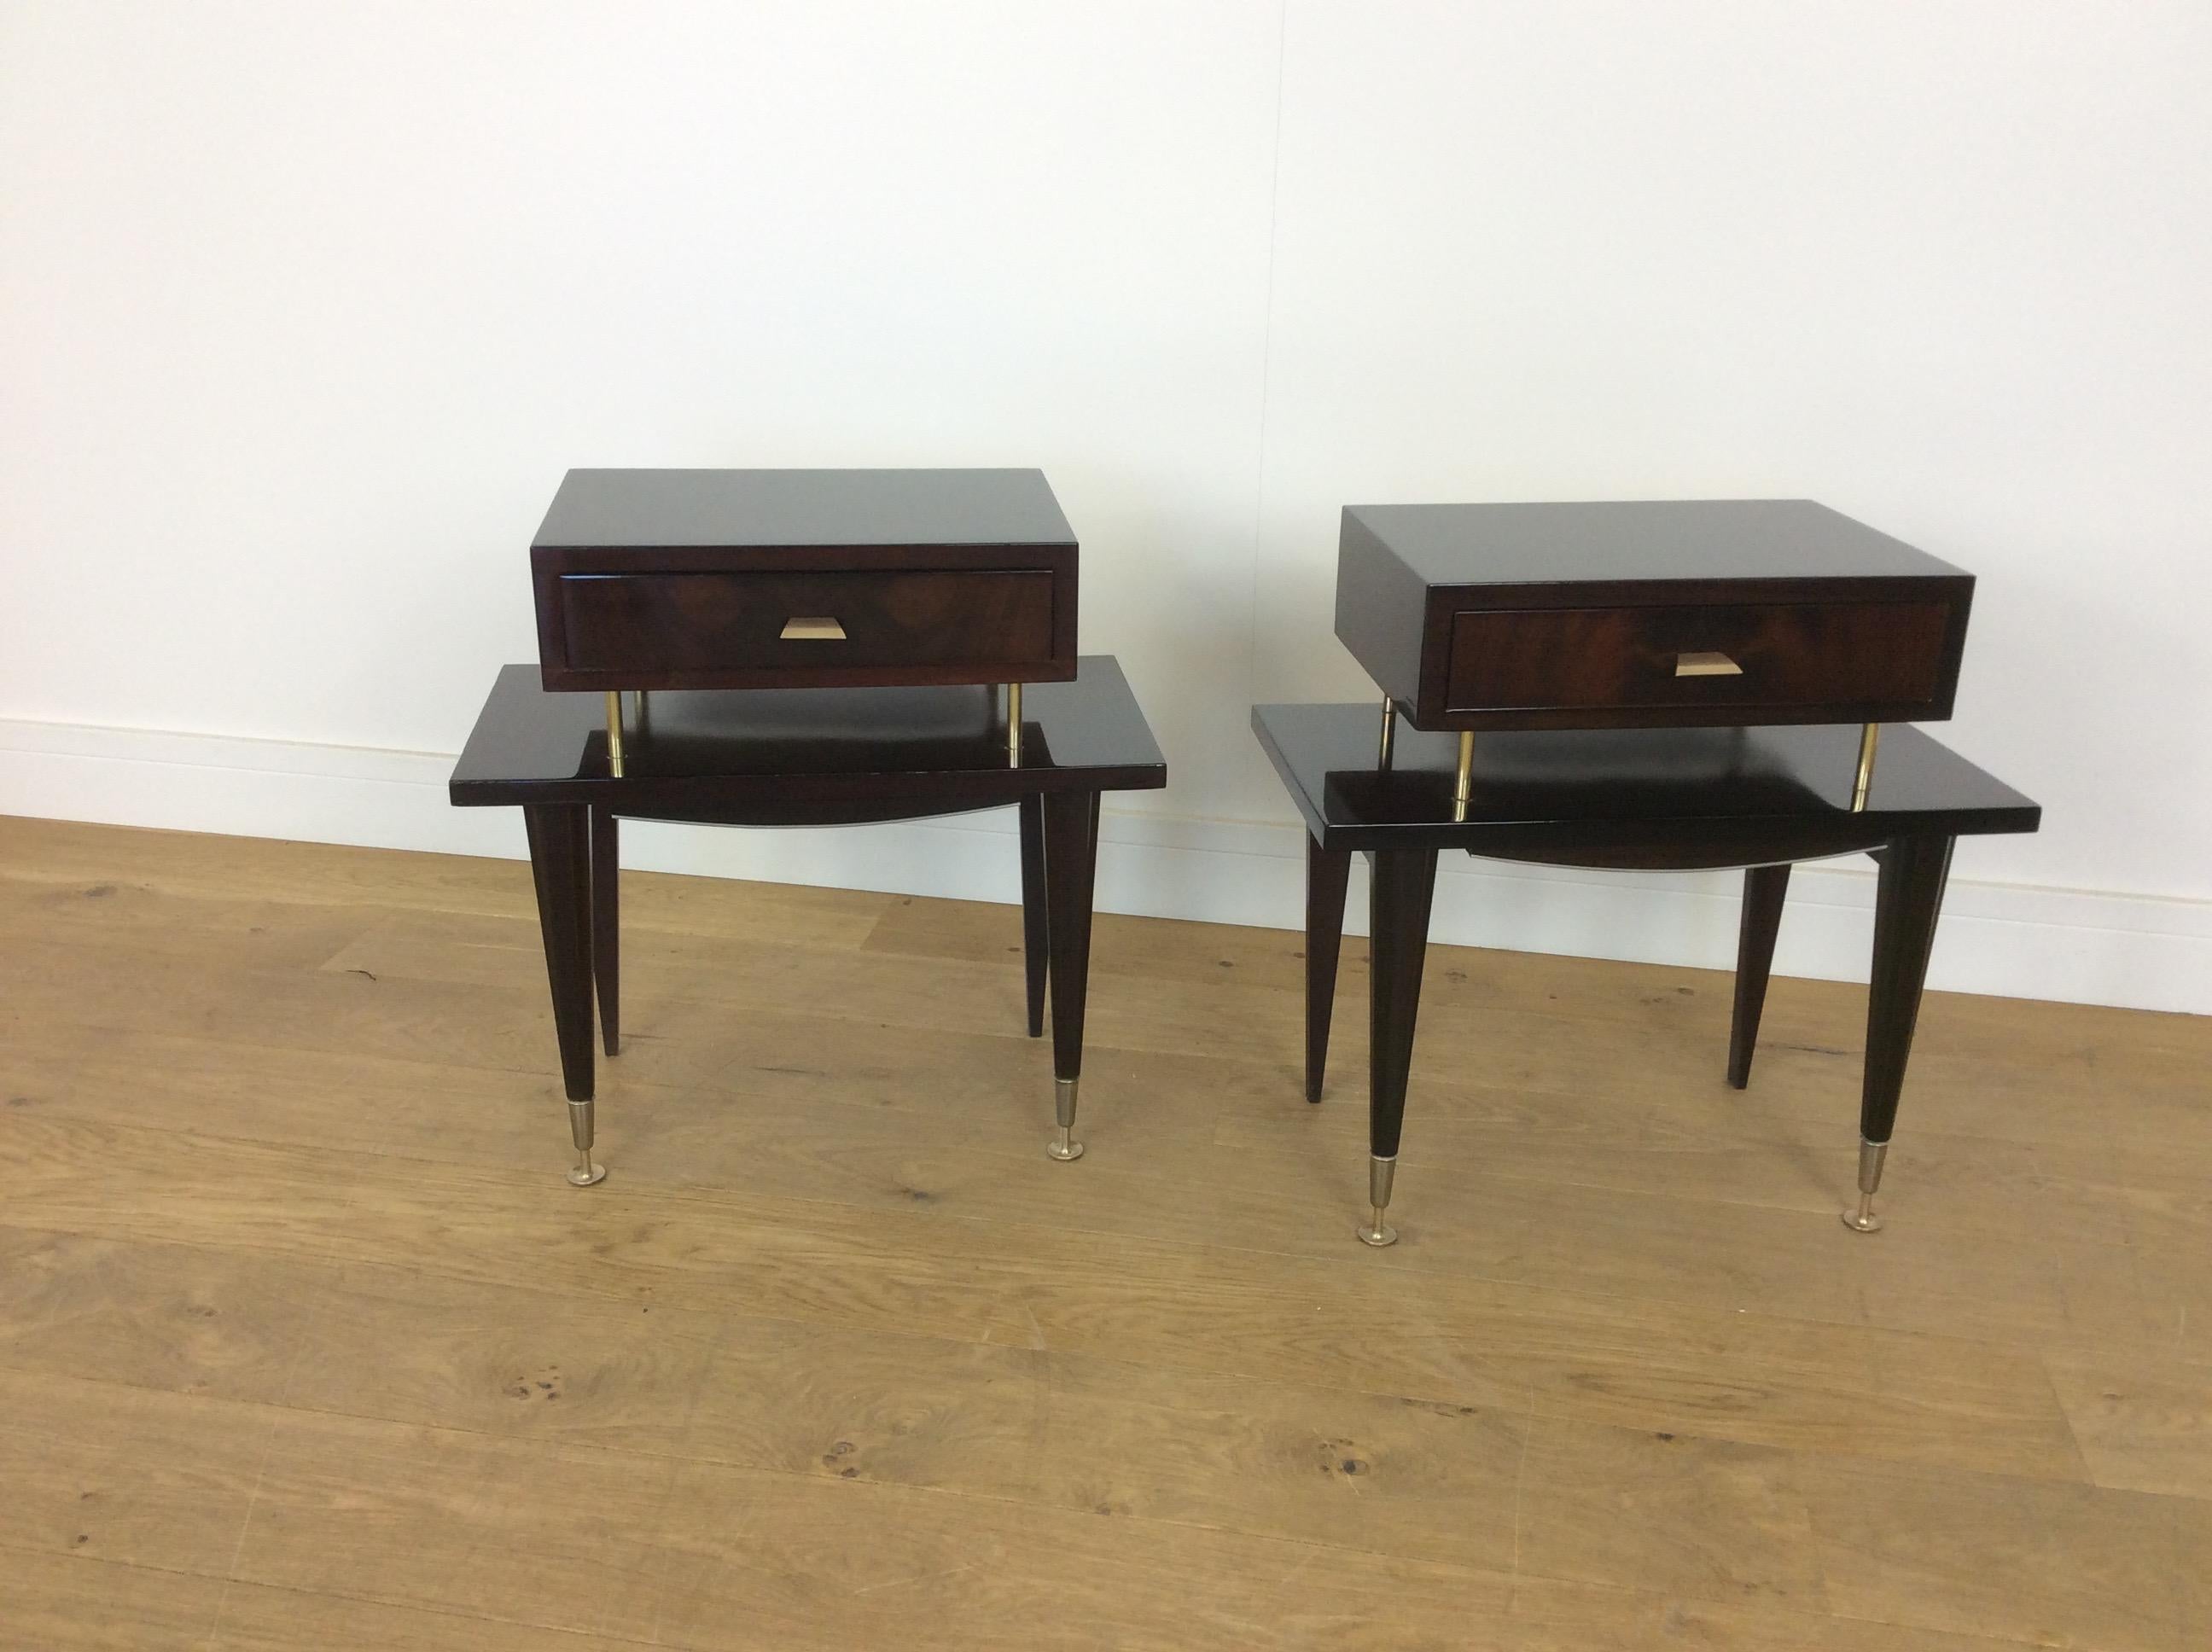 Midcentury nightstands.
A pair of midcentury bedside cabinets.
Very stylish bedside tables in a dark mahogany by Ameublement NF Meuble.
Measures: 56 cm H, 55 cm W, 30 cm D.
French, circa 1960.